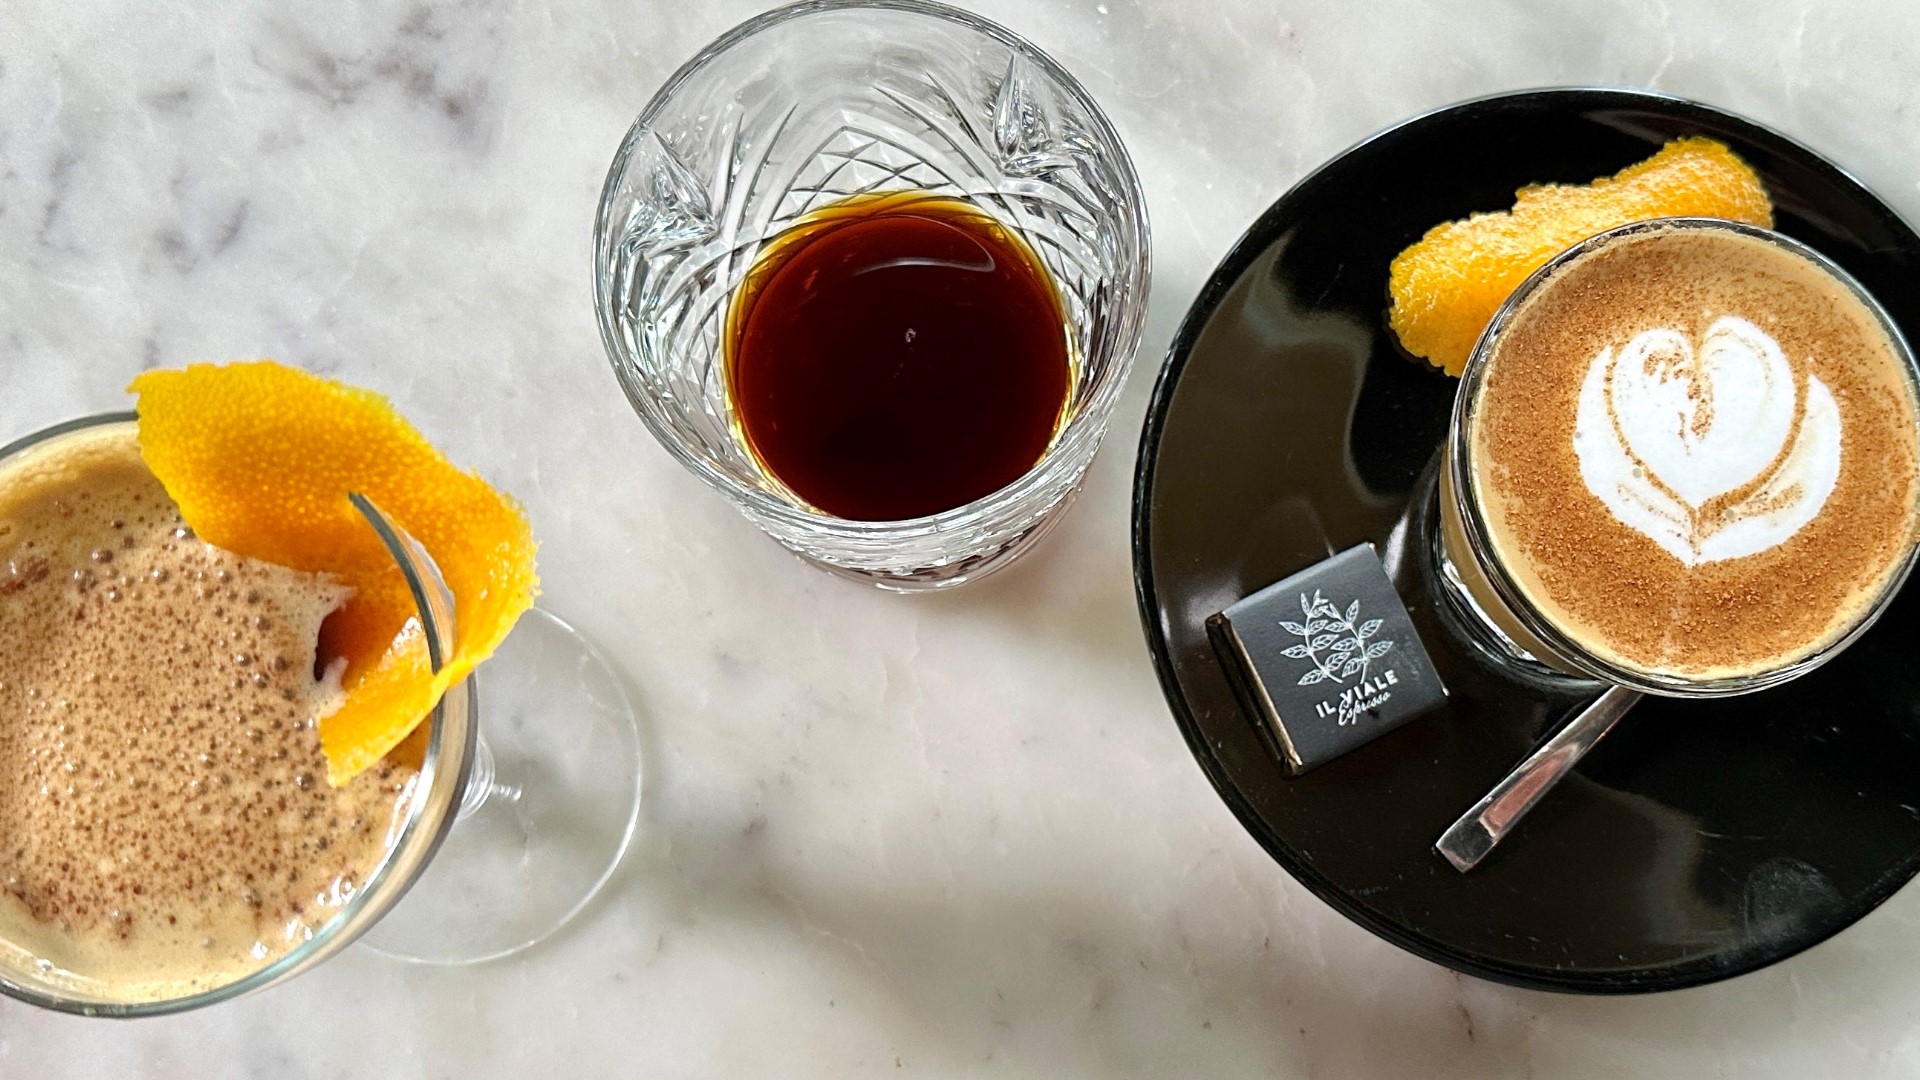 Il Viale and Bar Americano both specialize in Italian-inspired drinks and European ambiance.